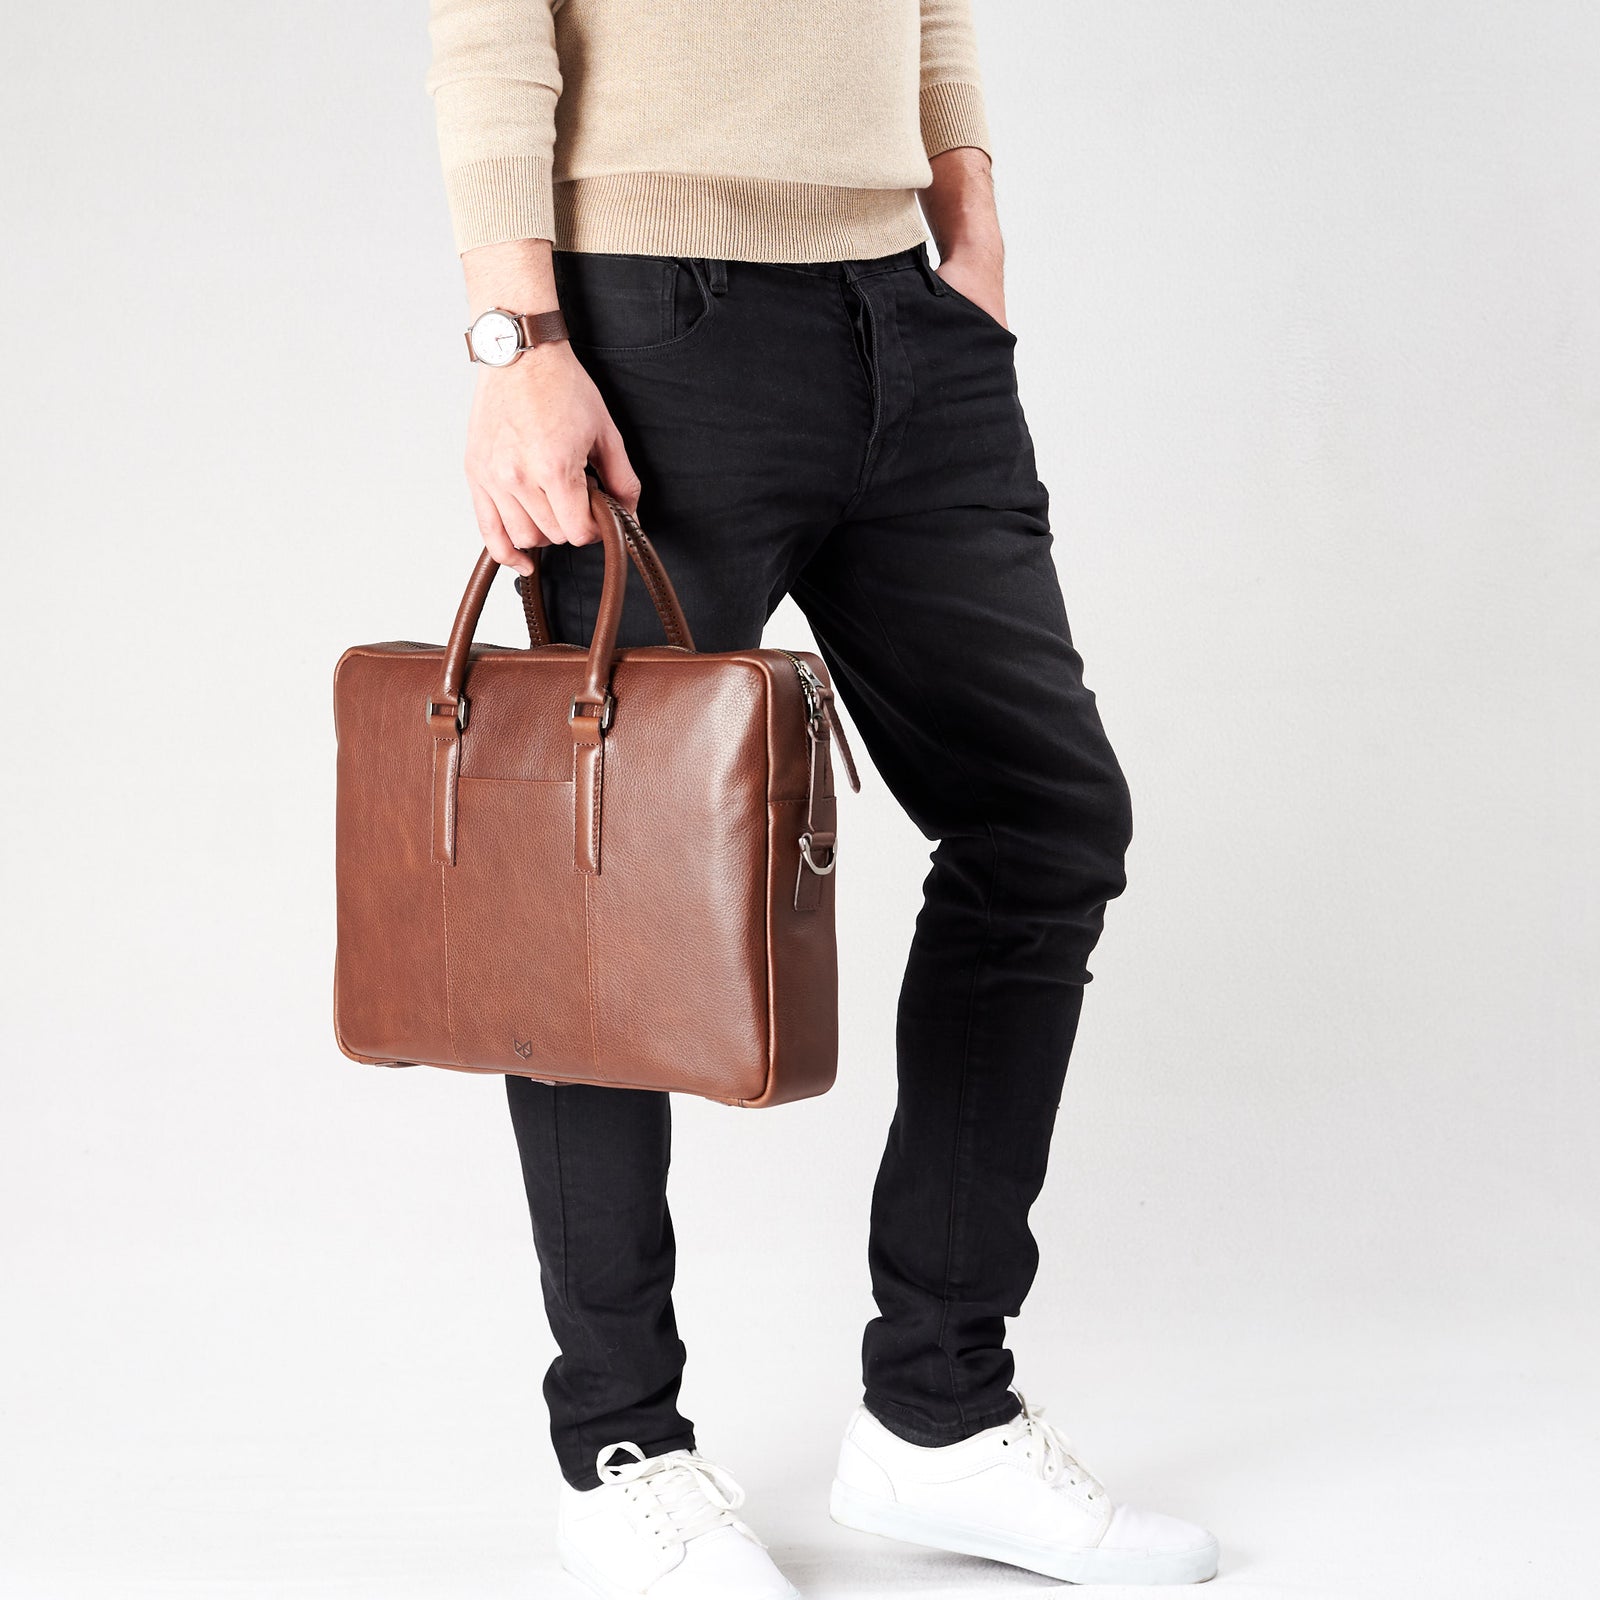 Style view, model holding bussiness document portfolio bag .Brown leather briefcase laptop bag for men. Gazeli laptop briefcase by Capra Leather.